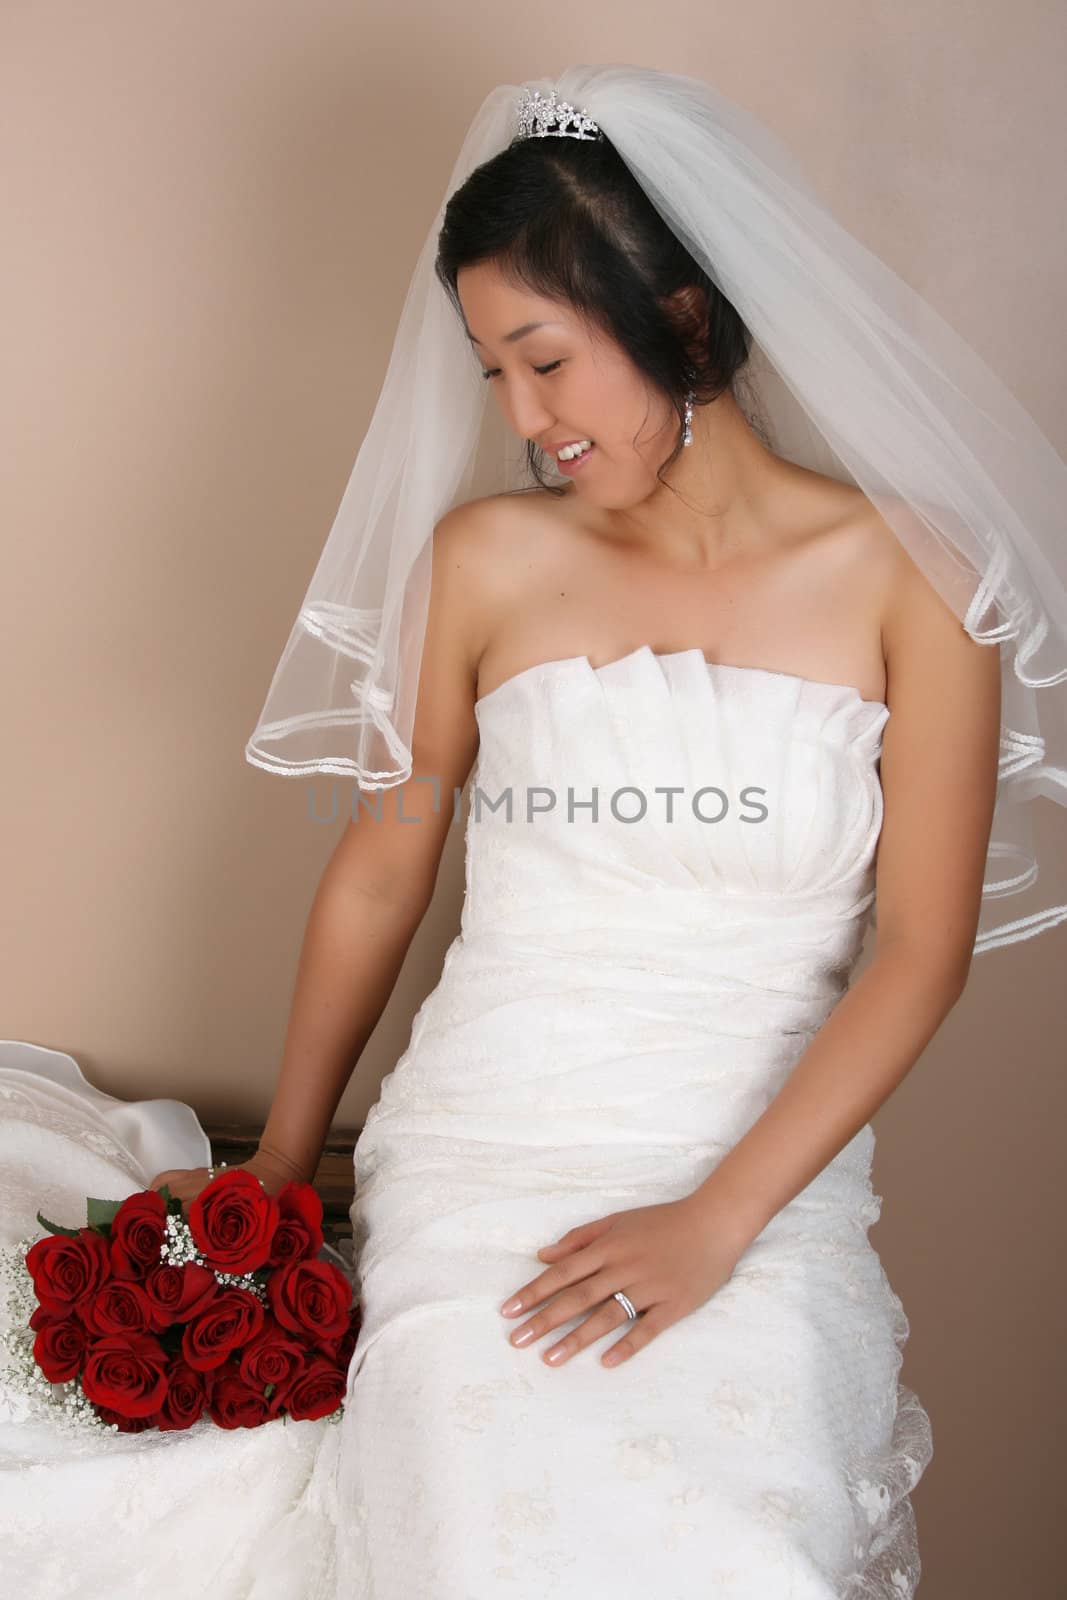 Beautiful bride wearing a traditional gown with red roses